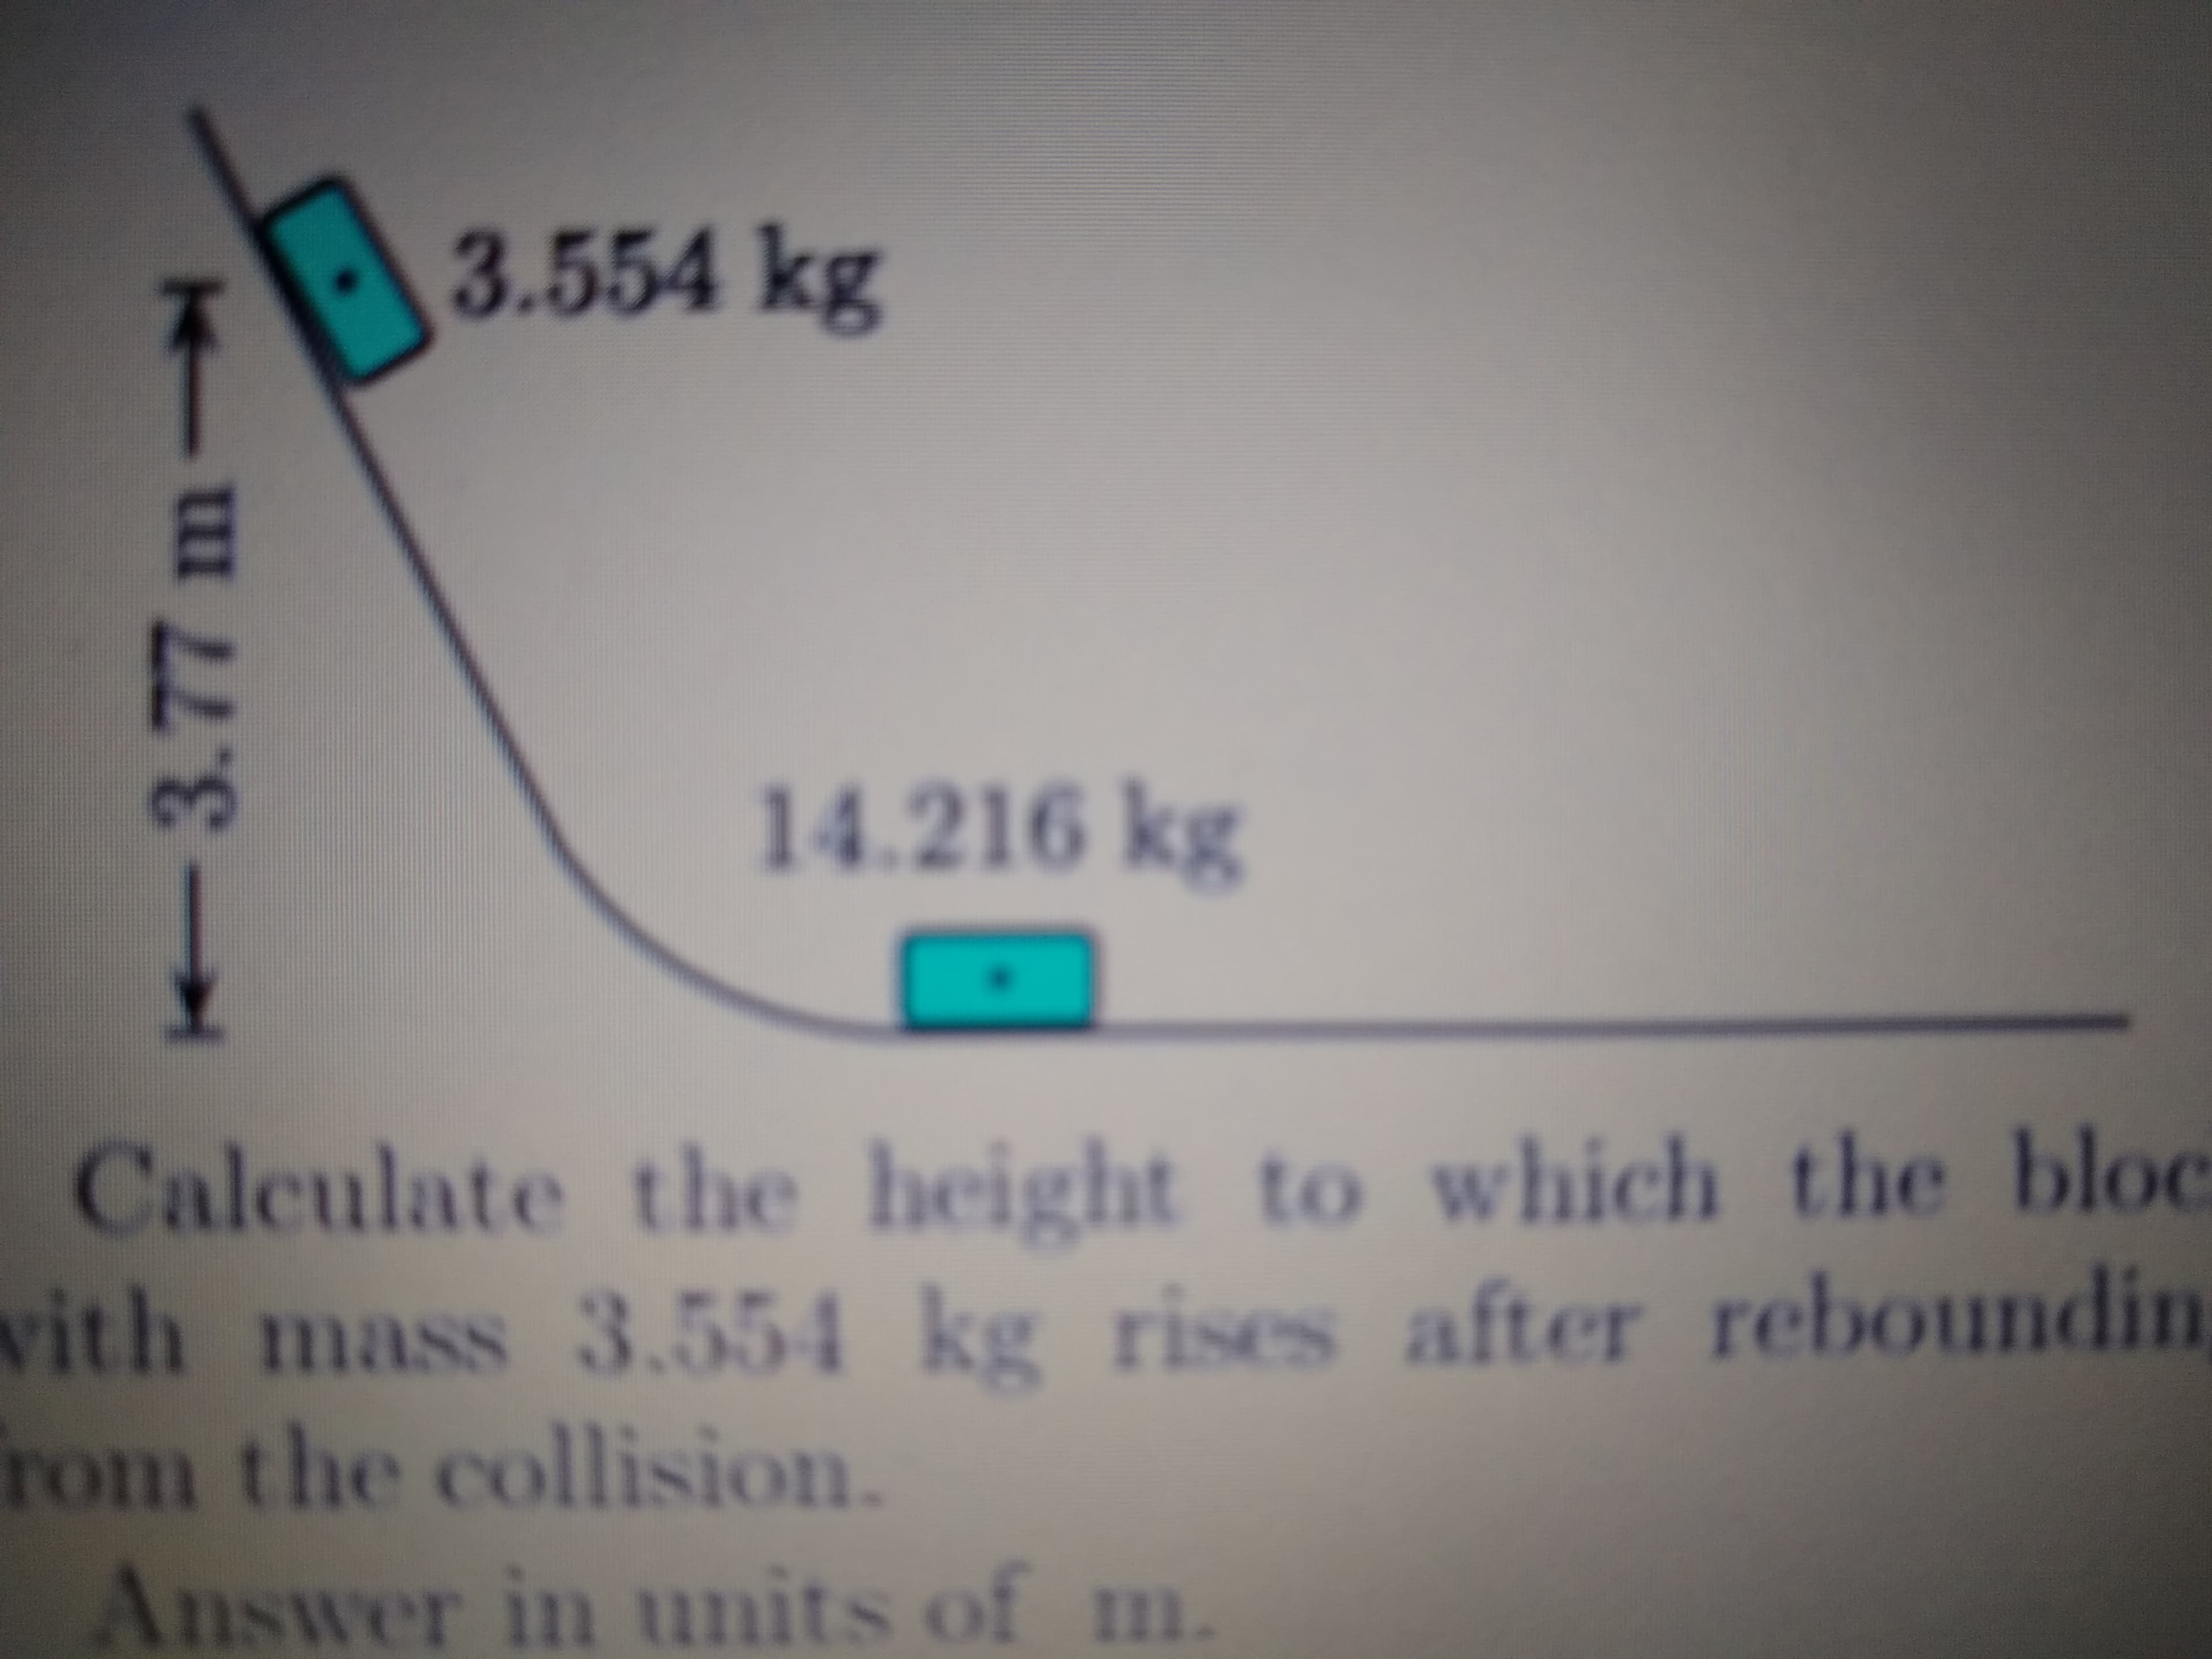 3.554kg
14.216 kg
Calculate the height to which the bloc
vith mass 3.554 kg rises after reboundin
rom the collision.
Answer in units of m.
%3D
3.77m
